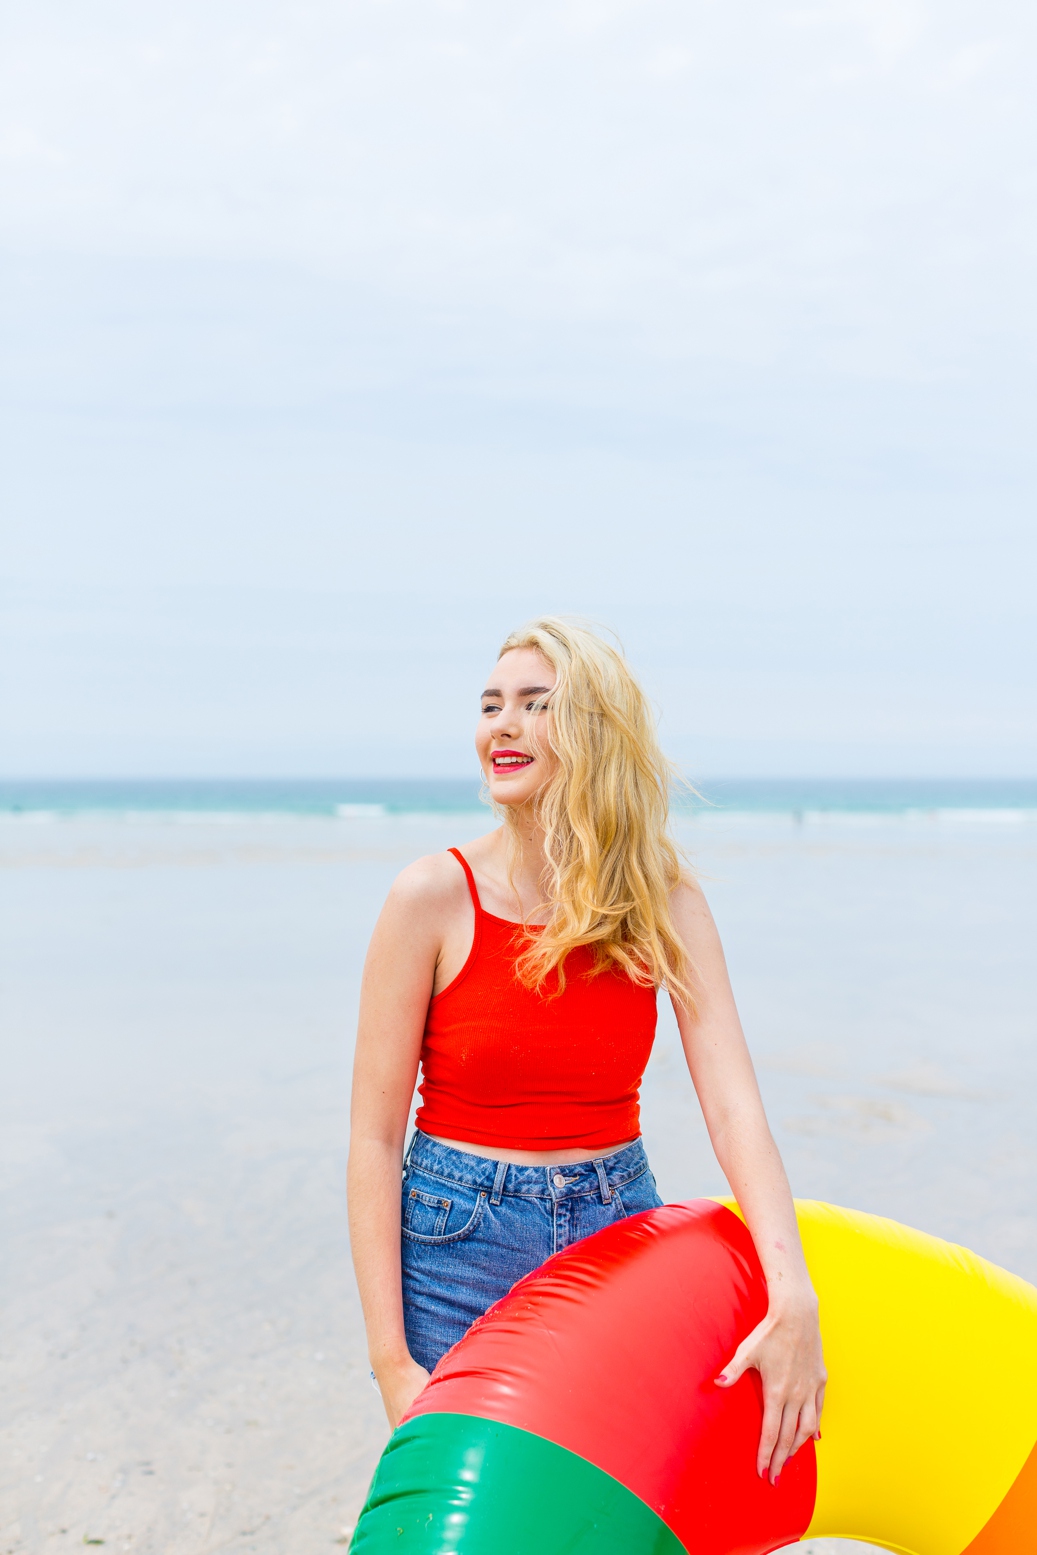 Colourful beach lifestyle photography. Cornwall photography & styling by Marianne Taylor.